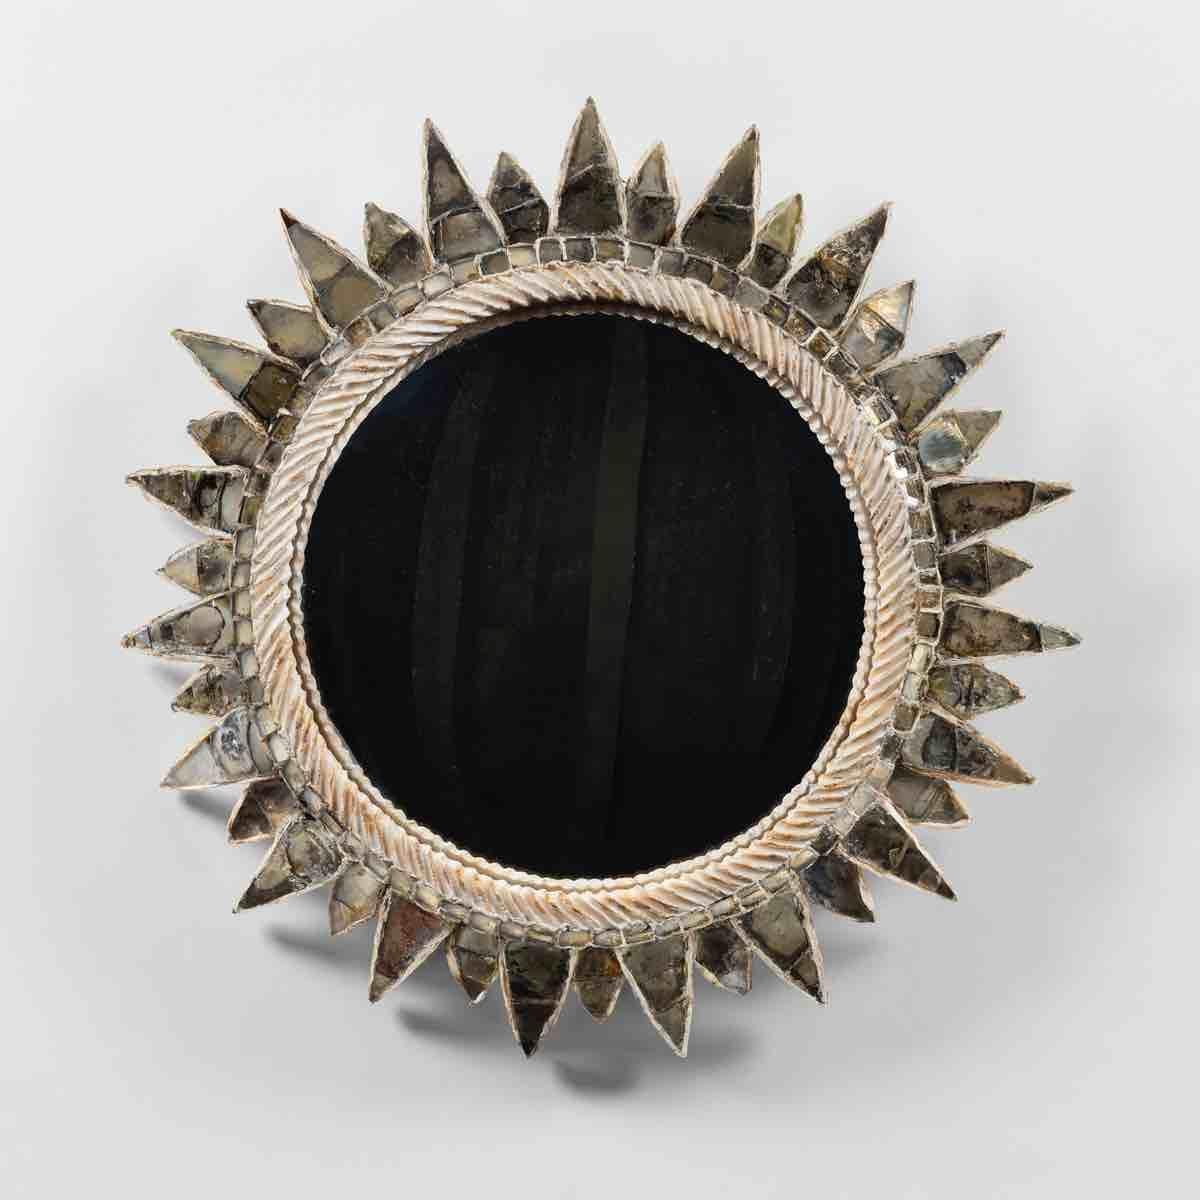 Soleil à pointes by Line Vautrin – White talosel mirror inlaid with Champagne colored mirrors (form number 2).
Structure in white talosel whose rays (38 in number) are inlaid with Champagne-colored mirrors with light gray reflections.
The edge of